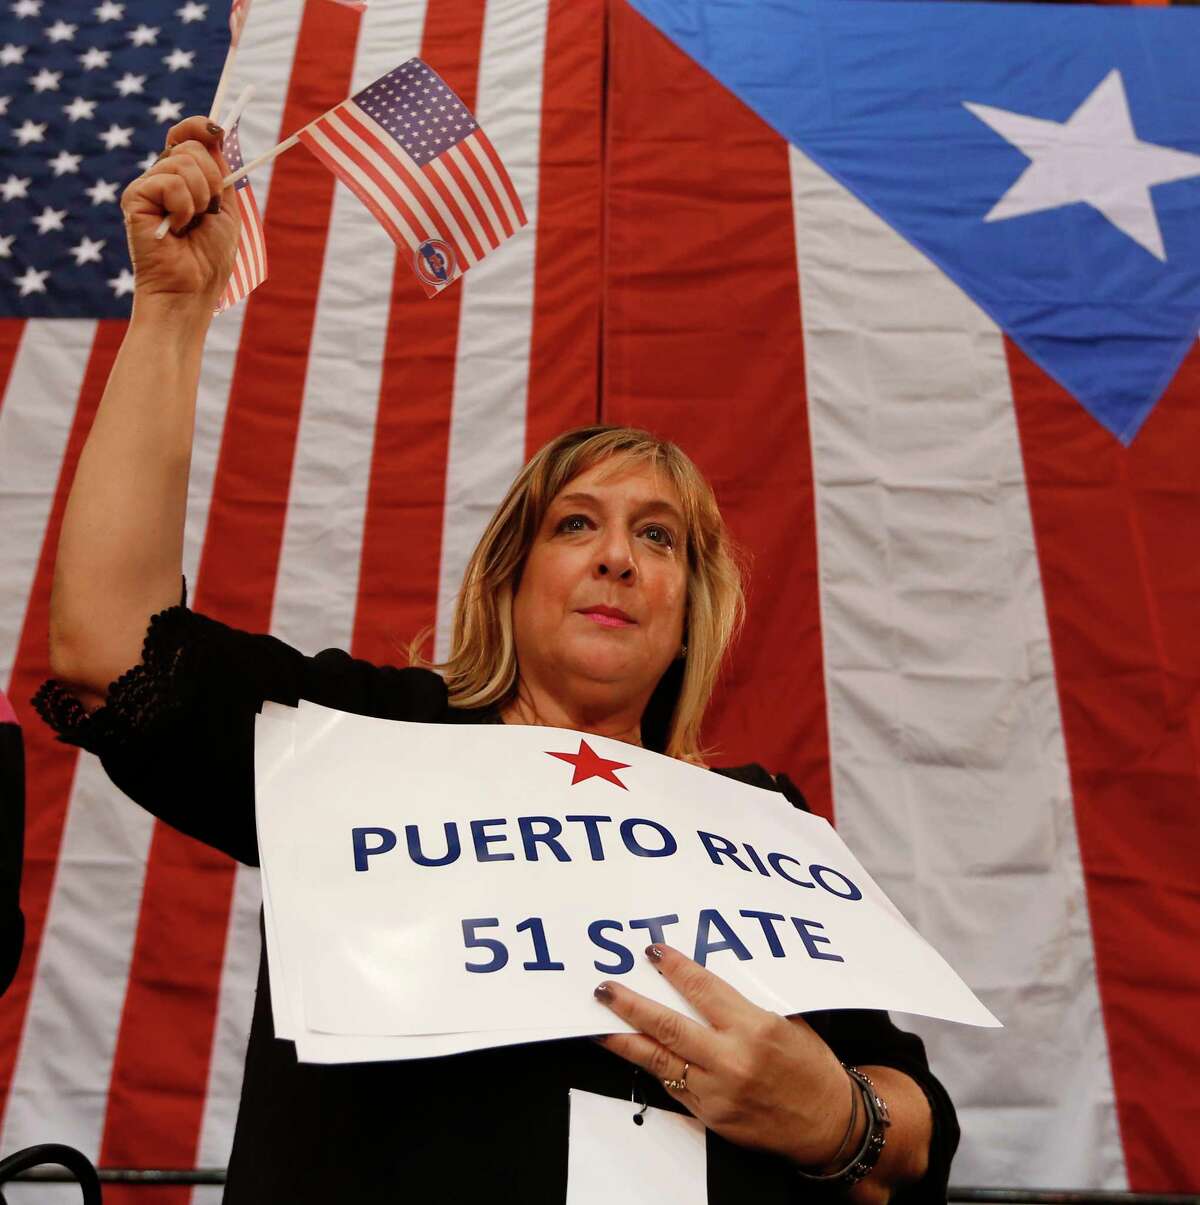 Audience member Arlene Dudeil waves flags during a Republican presidential candidate, Sen. Marco Rubio, R-Fla., rally in Toa Baja, Puerto Rico, Saturday, March 5, 2016.